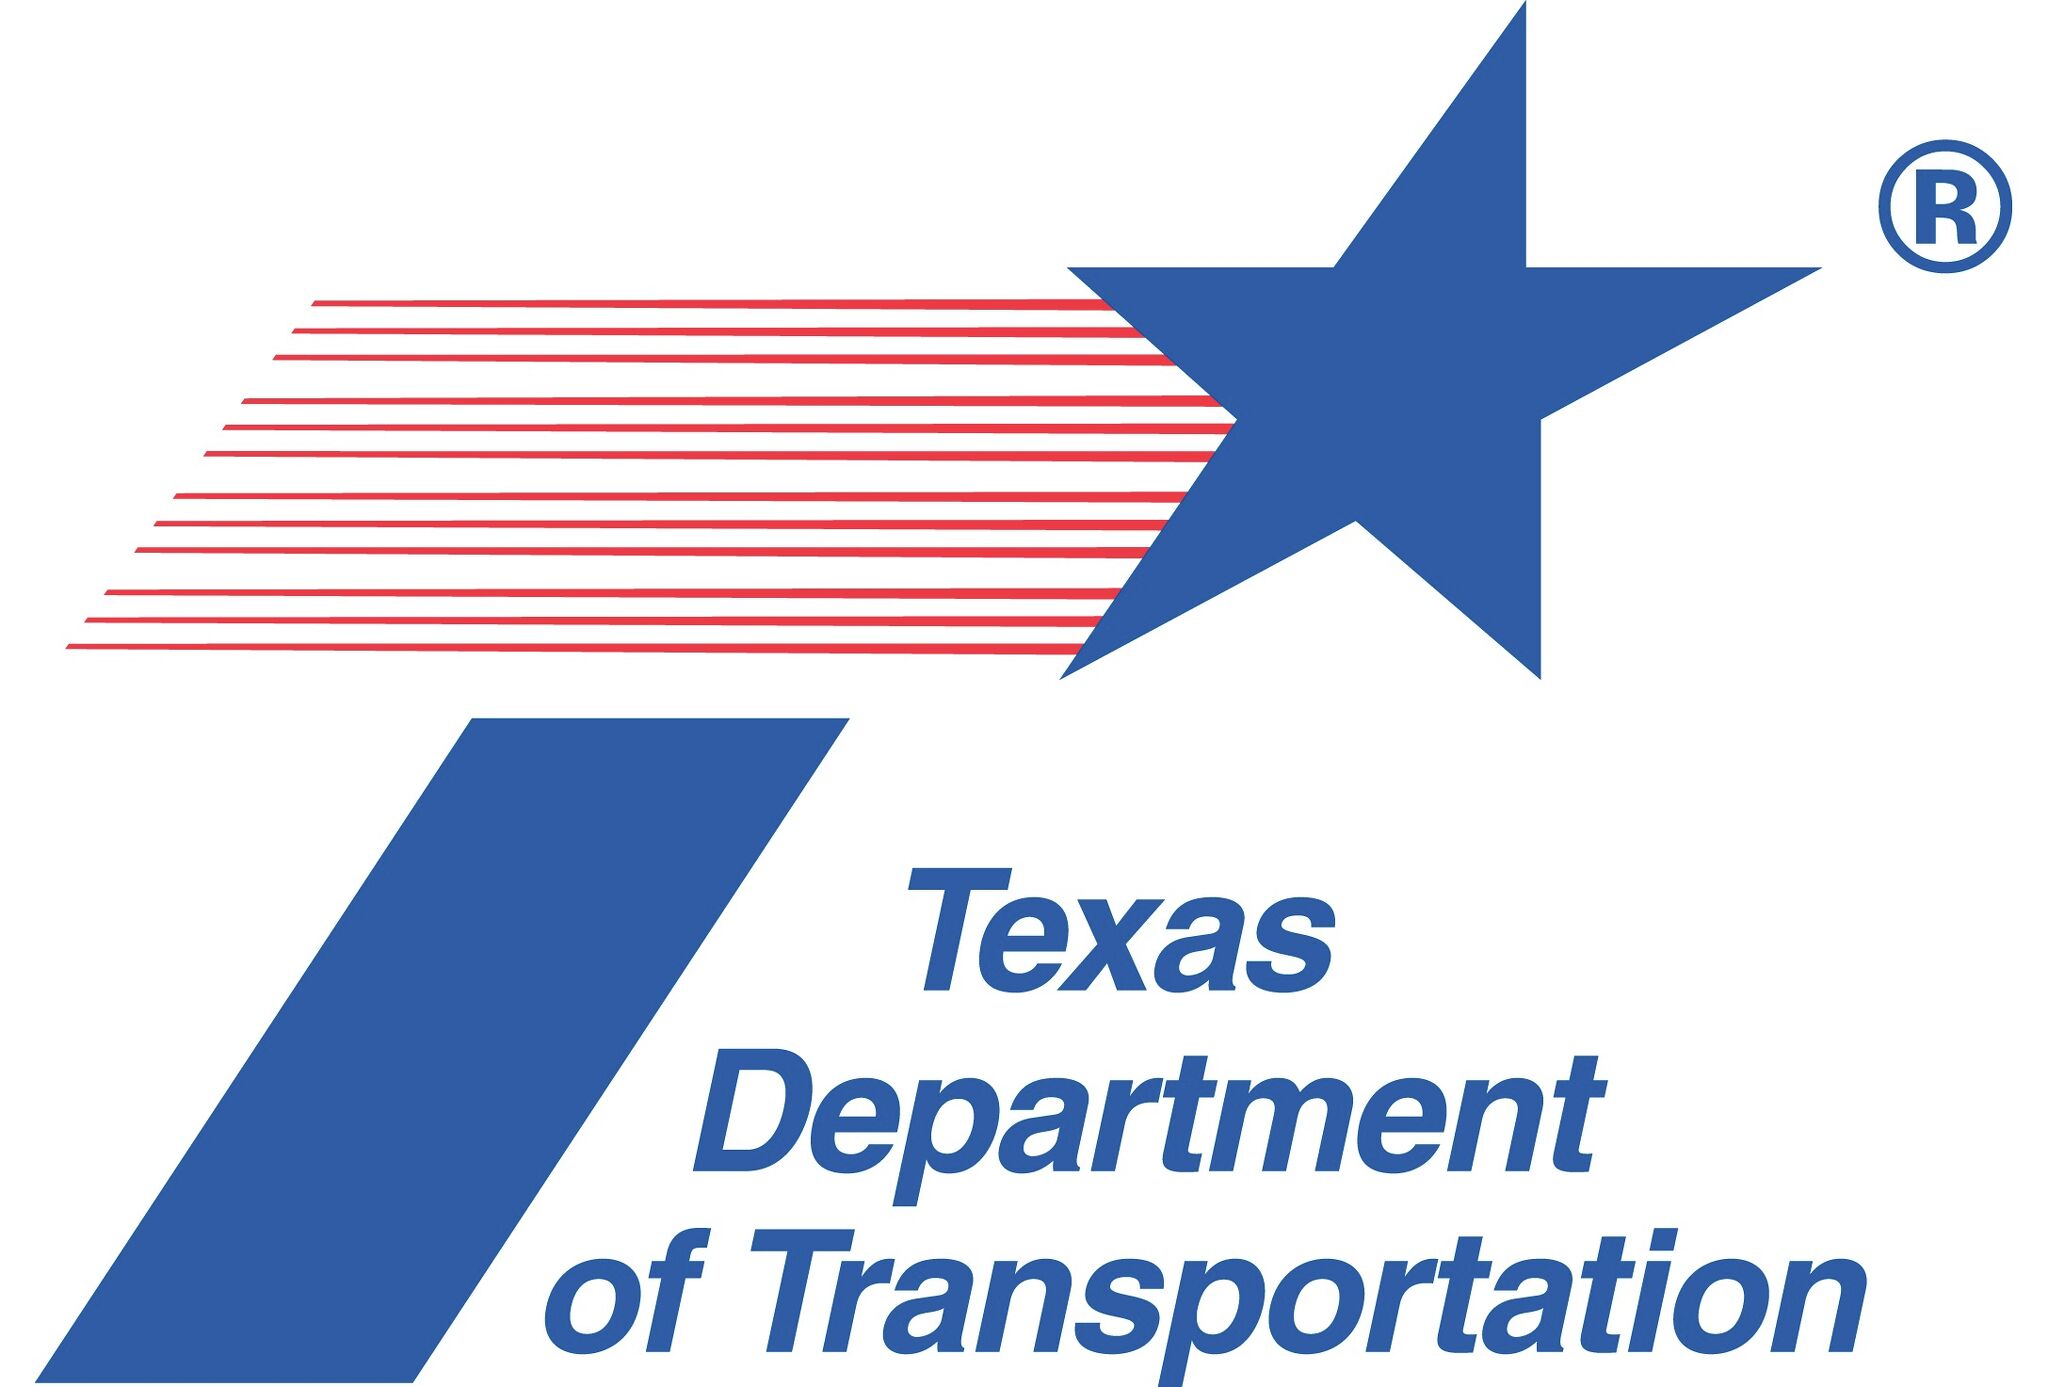 Interstate 10 will experience a closure starting Friday